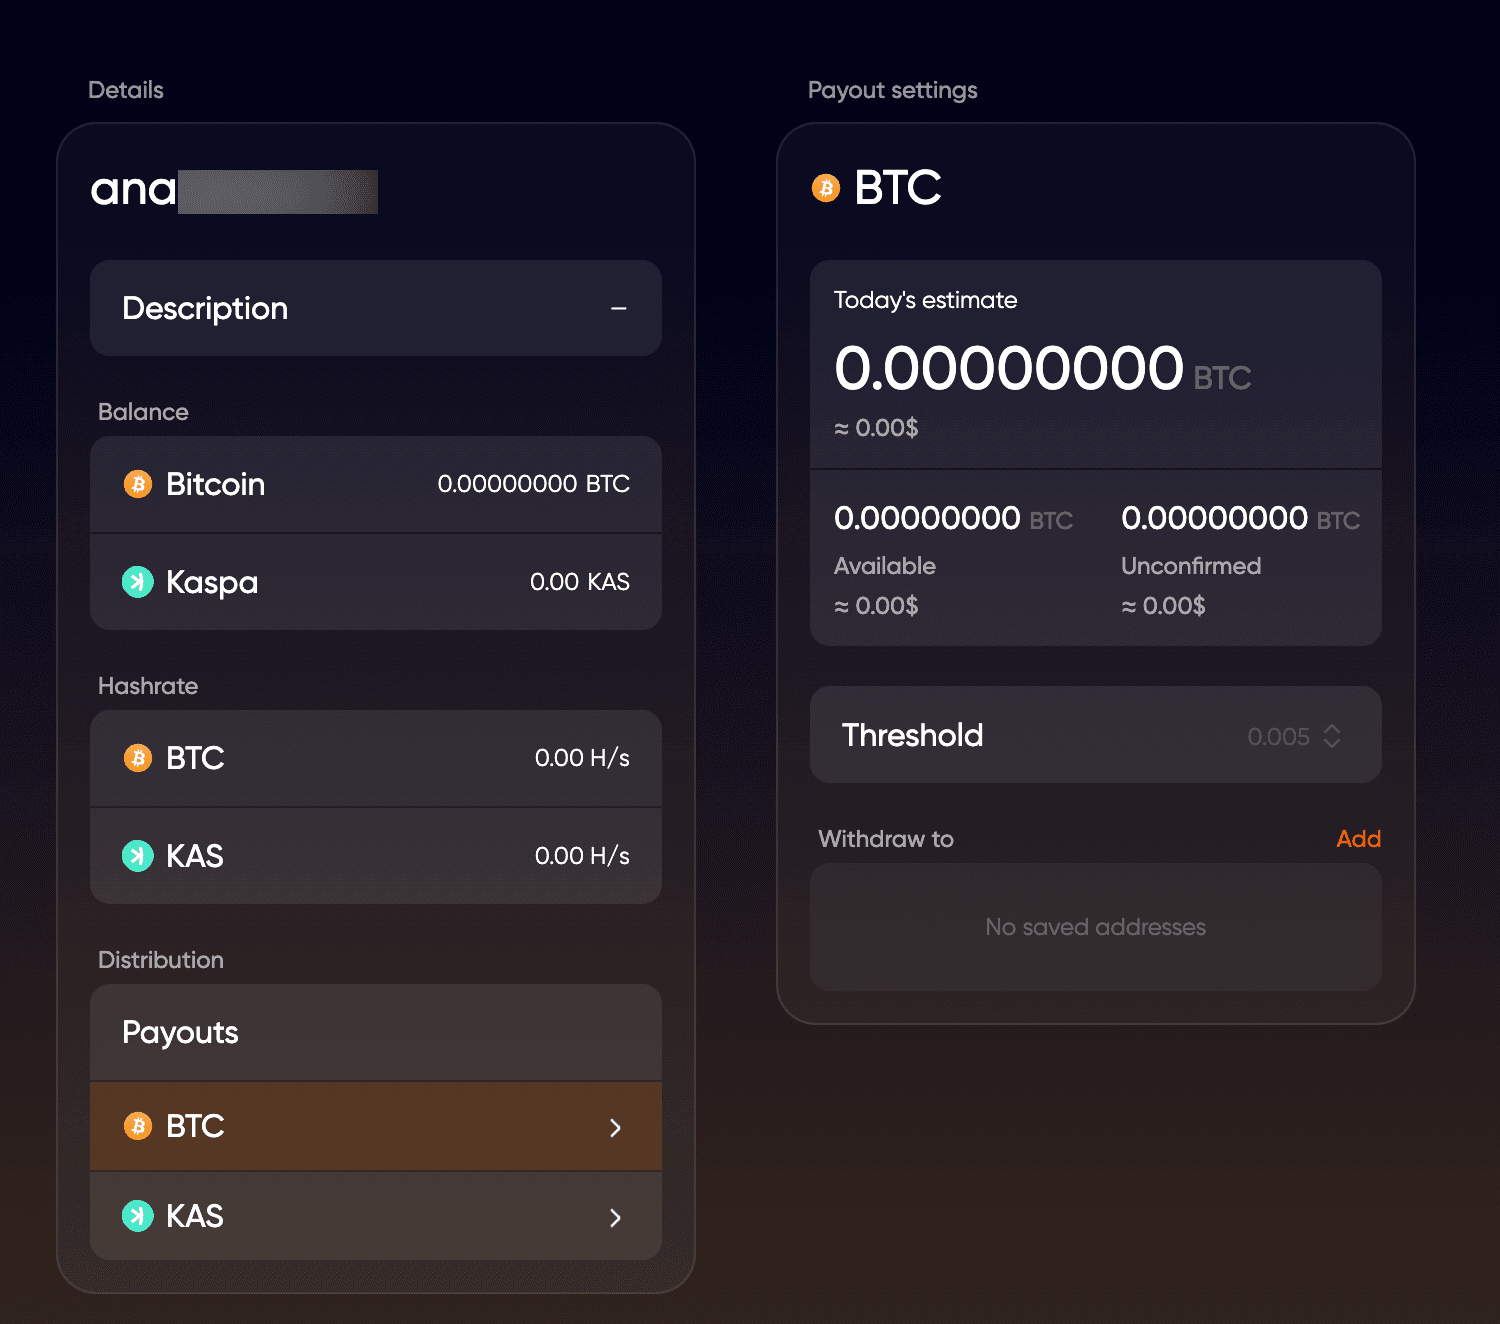 mining_account_payouts_settings.png